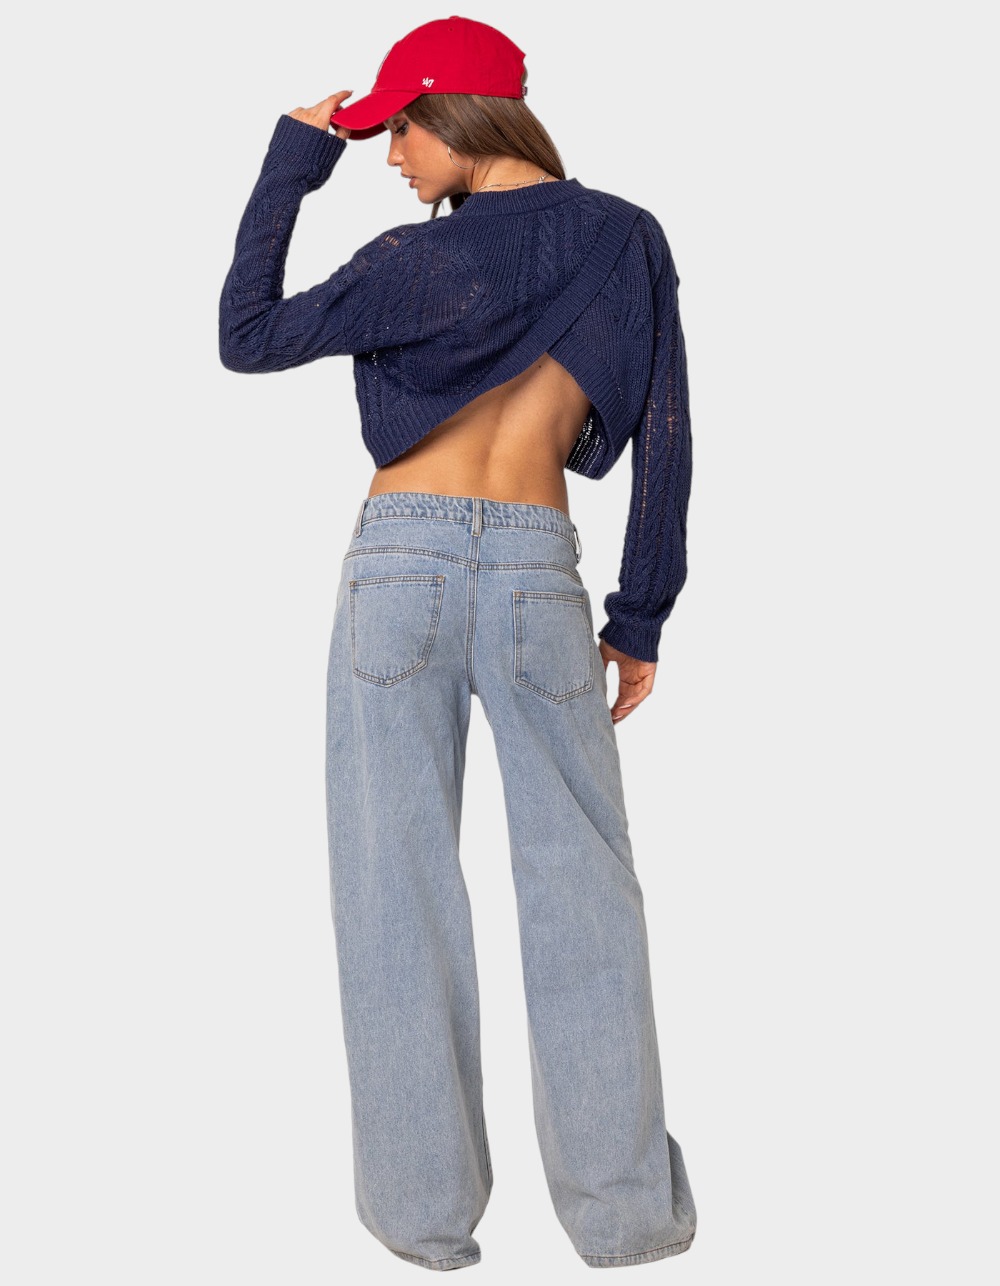 EDIKTED Gabrielle Cropped Cable Knit Sweater